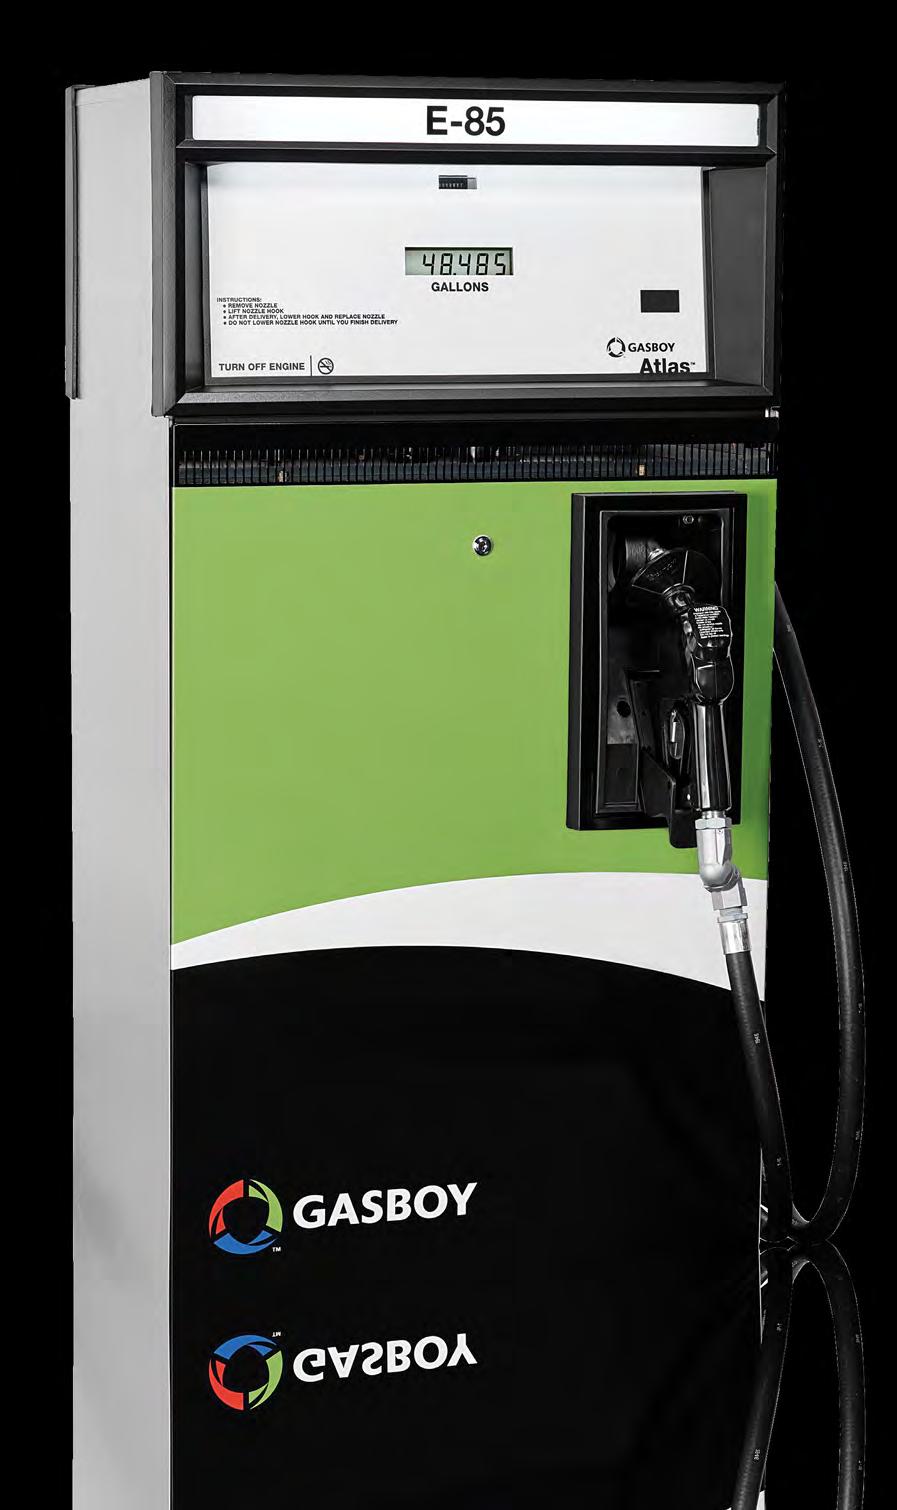 ATLAS 9872K E85 9872K E L E C T R O N I C E 8 5 Atlas E85 Dispenser The 9872K Series is specifically designed and UL listed for use with E85 fuels.